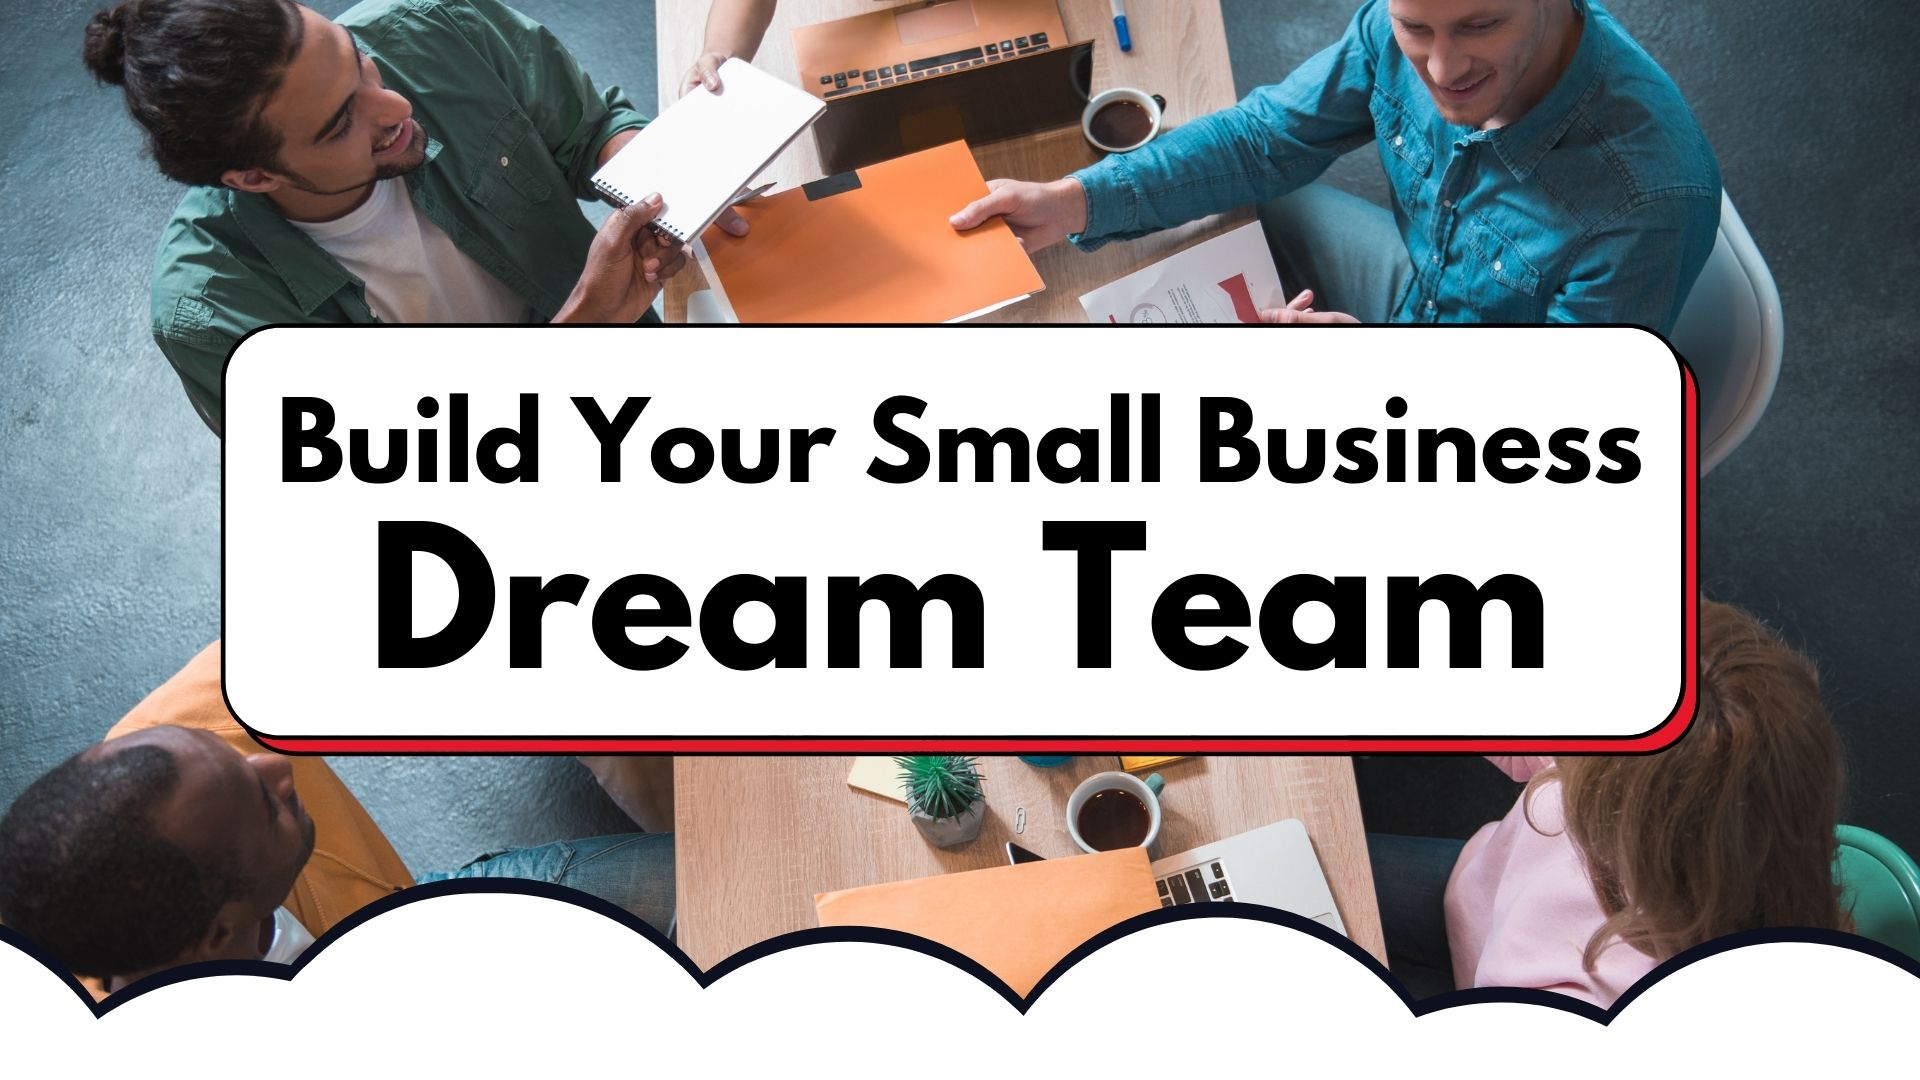 team building, employee, small business employee, startu hiring, hiring your team, hiring employees, small business hiring 2021, small business hiring, building your team